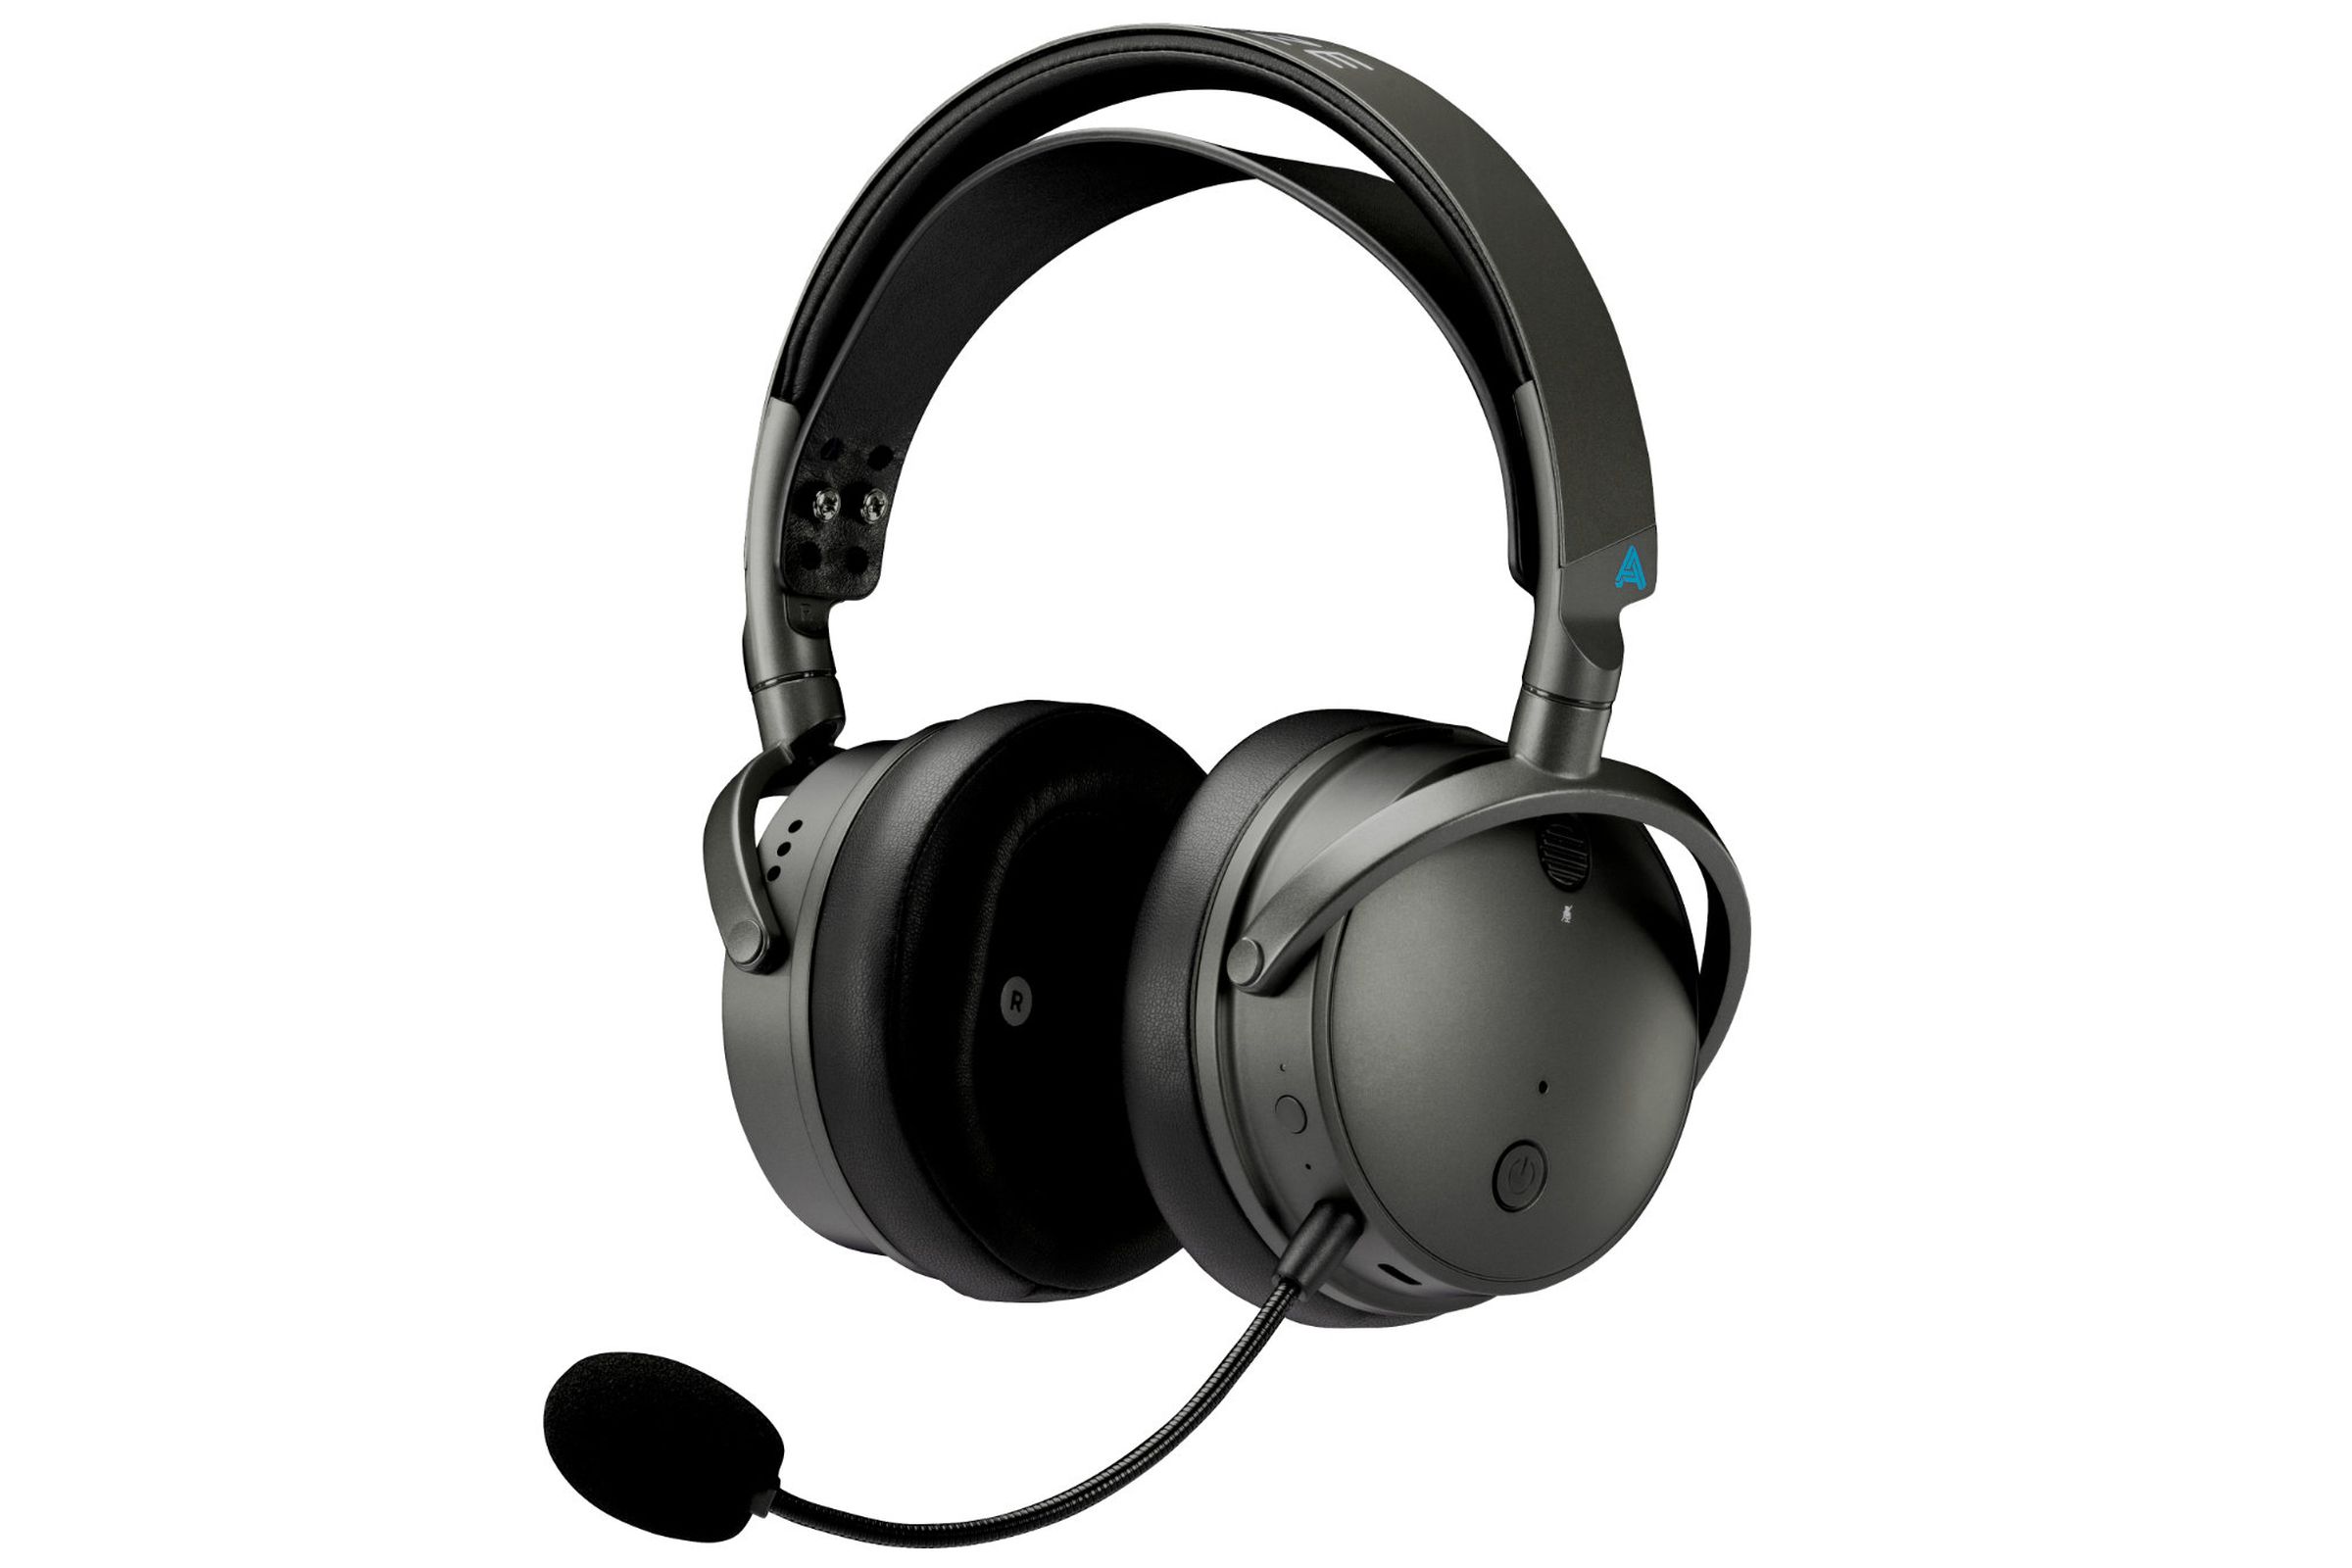 Audeze’s Maxwell gaming headset. This image shows off its plain design along with its detachable boom microphone.